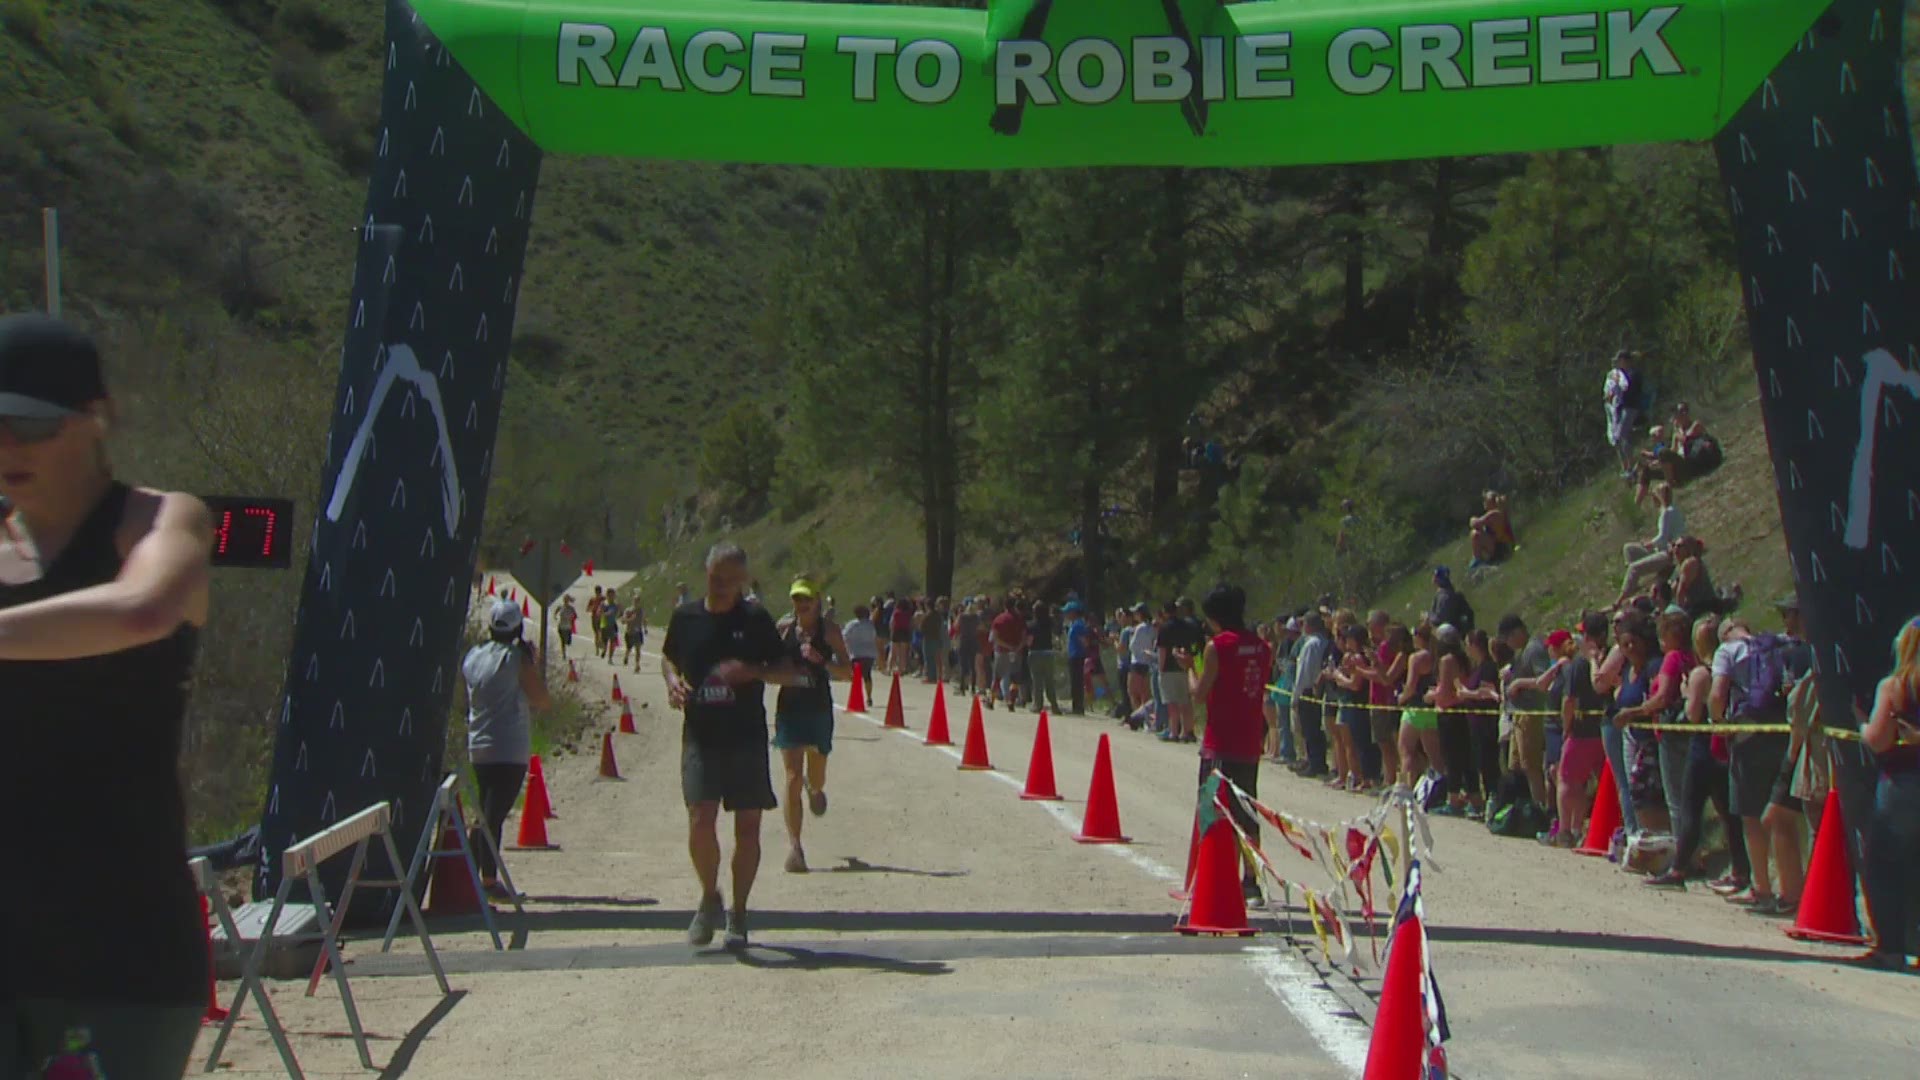 Fifth group of finishers in 41st annual Race To Robie Creek